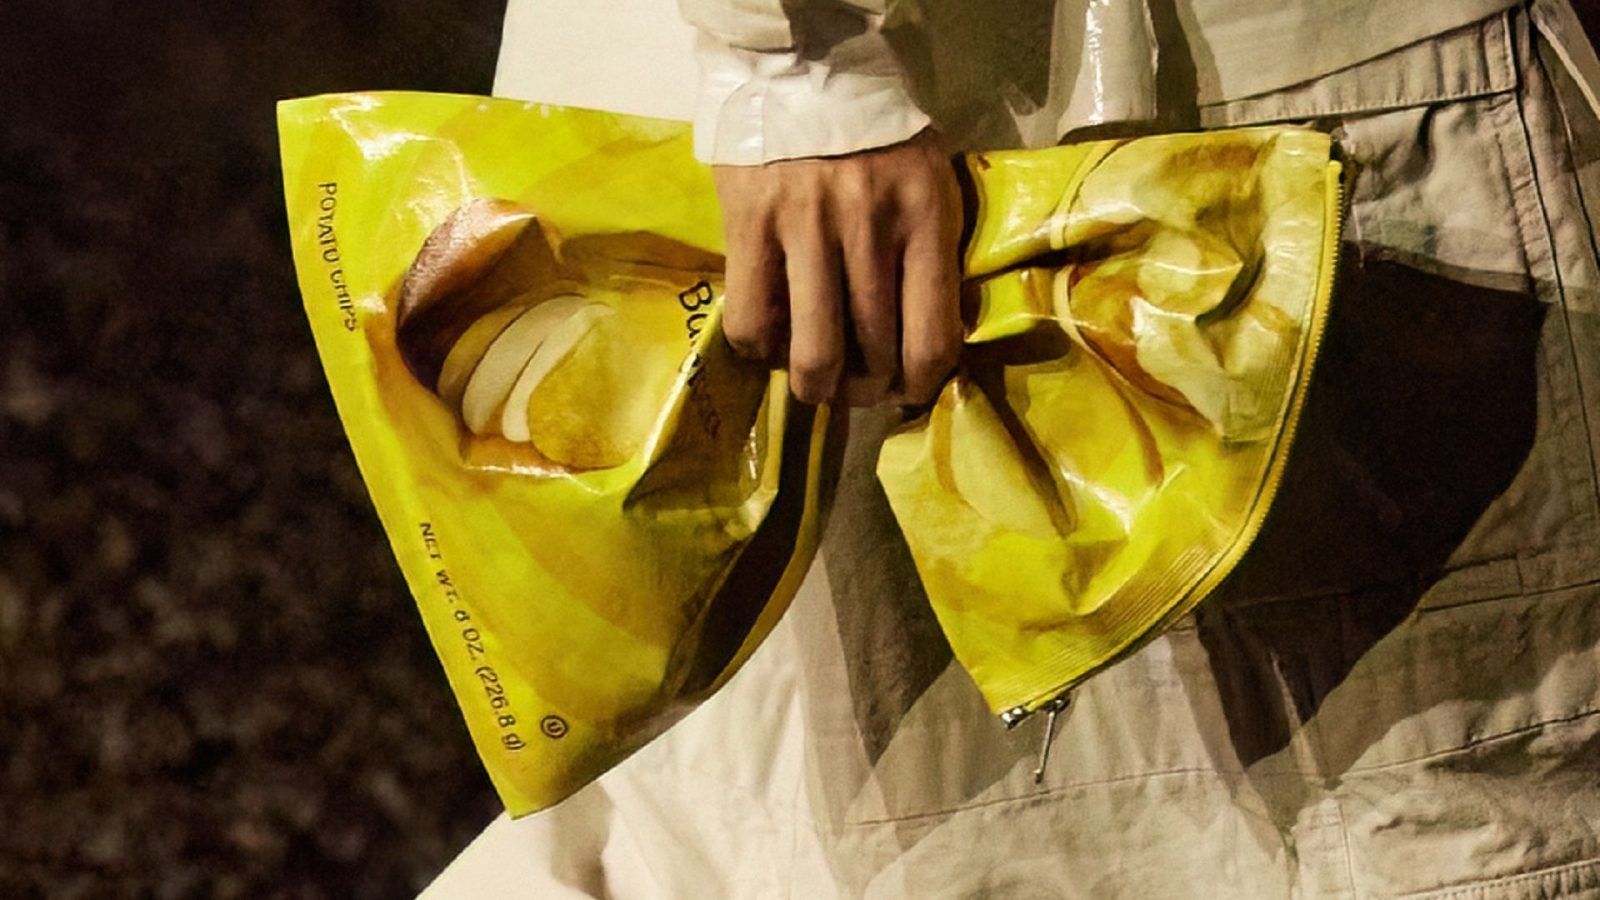 Badekar Selvforkælelse centeret Balenciaga has created a bag that resembles a pack of Lay's potato chips